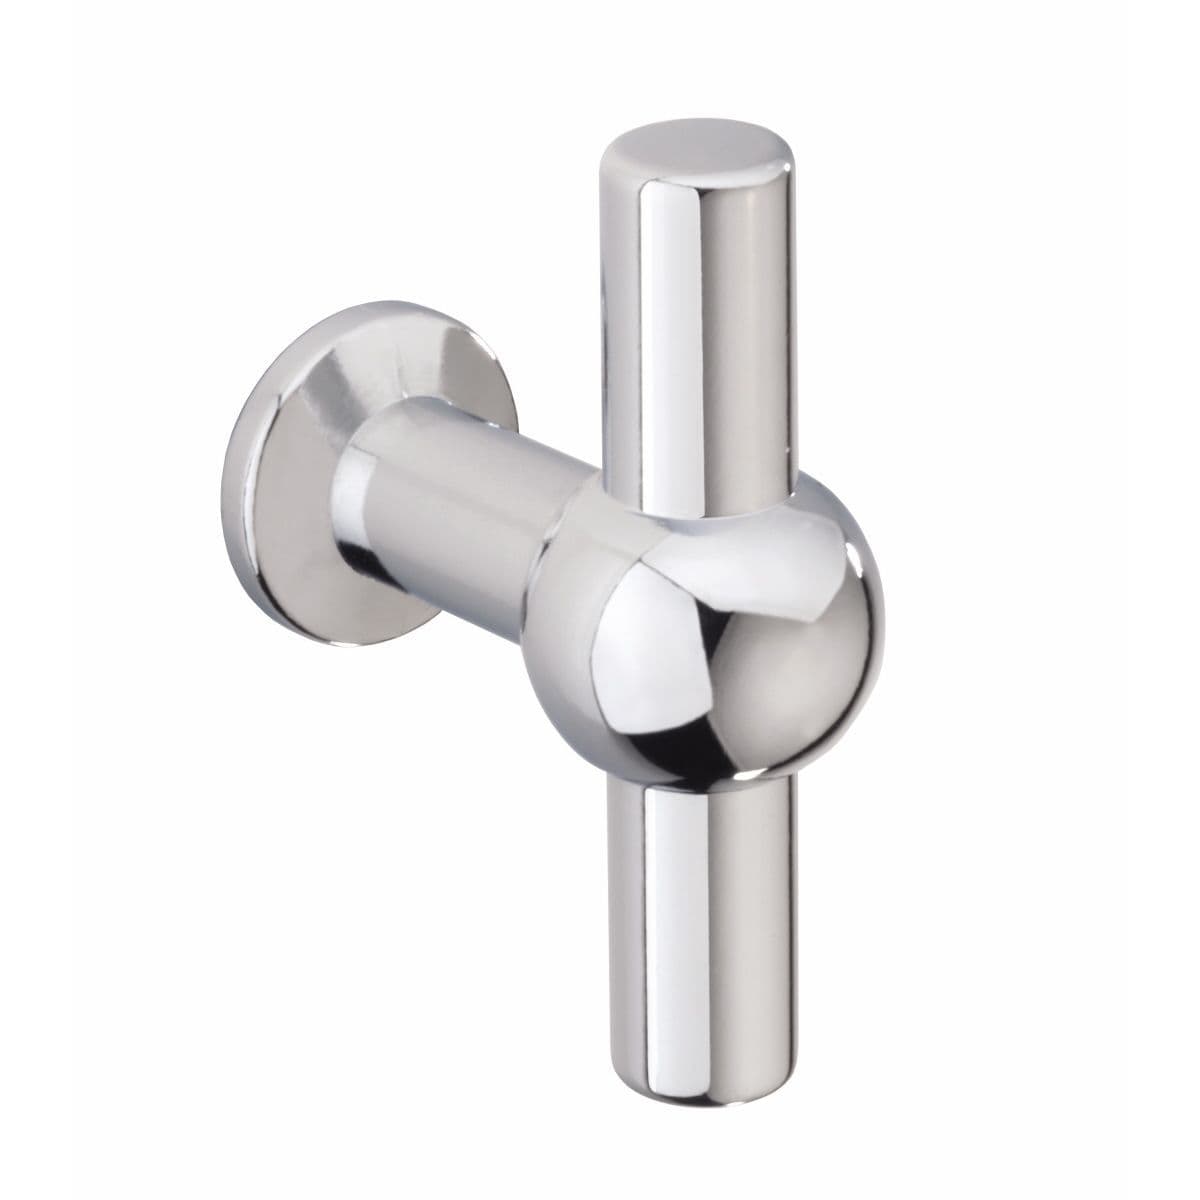 WEEL T KNOB Cupboard Handle - 60mm long - 3 finishes (PWS H1091.60)